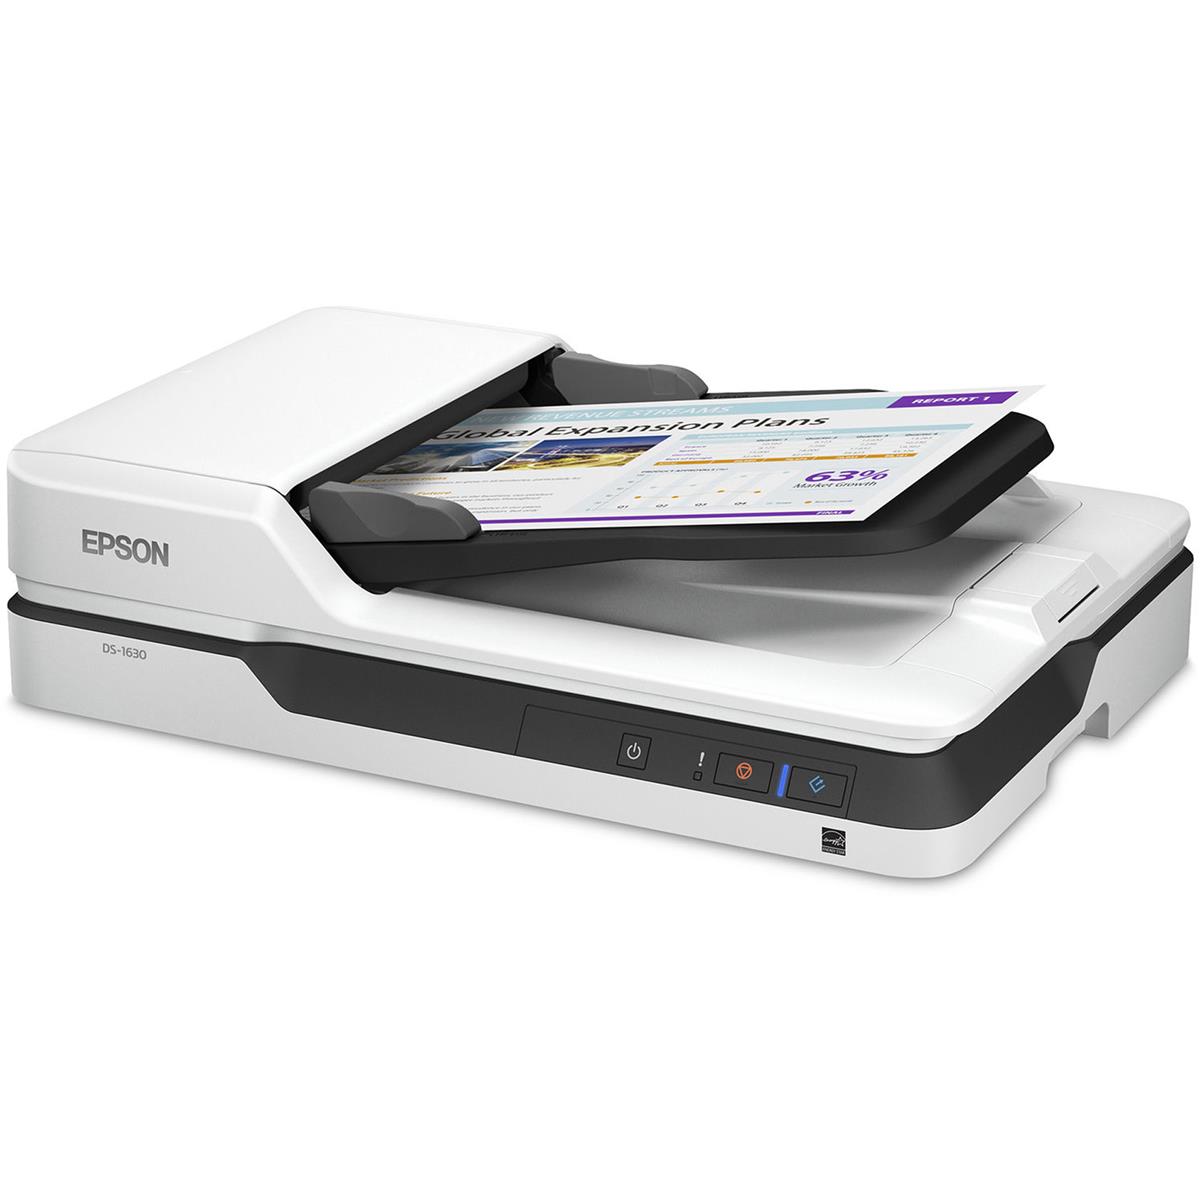 

Epson DS-1630 Flatbed Color Document Scanner with ADF